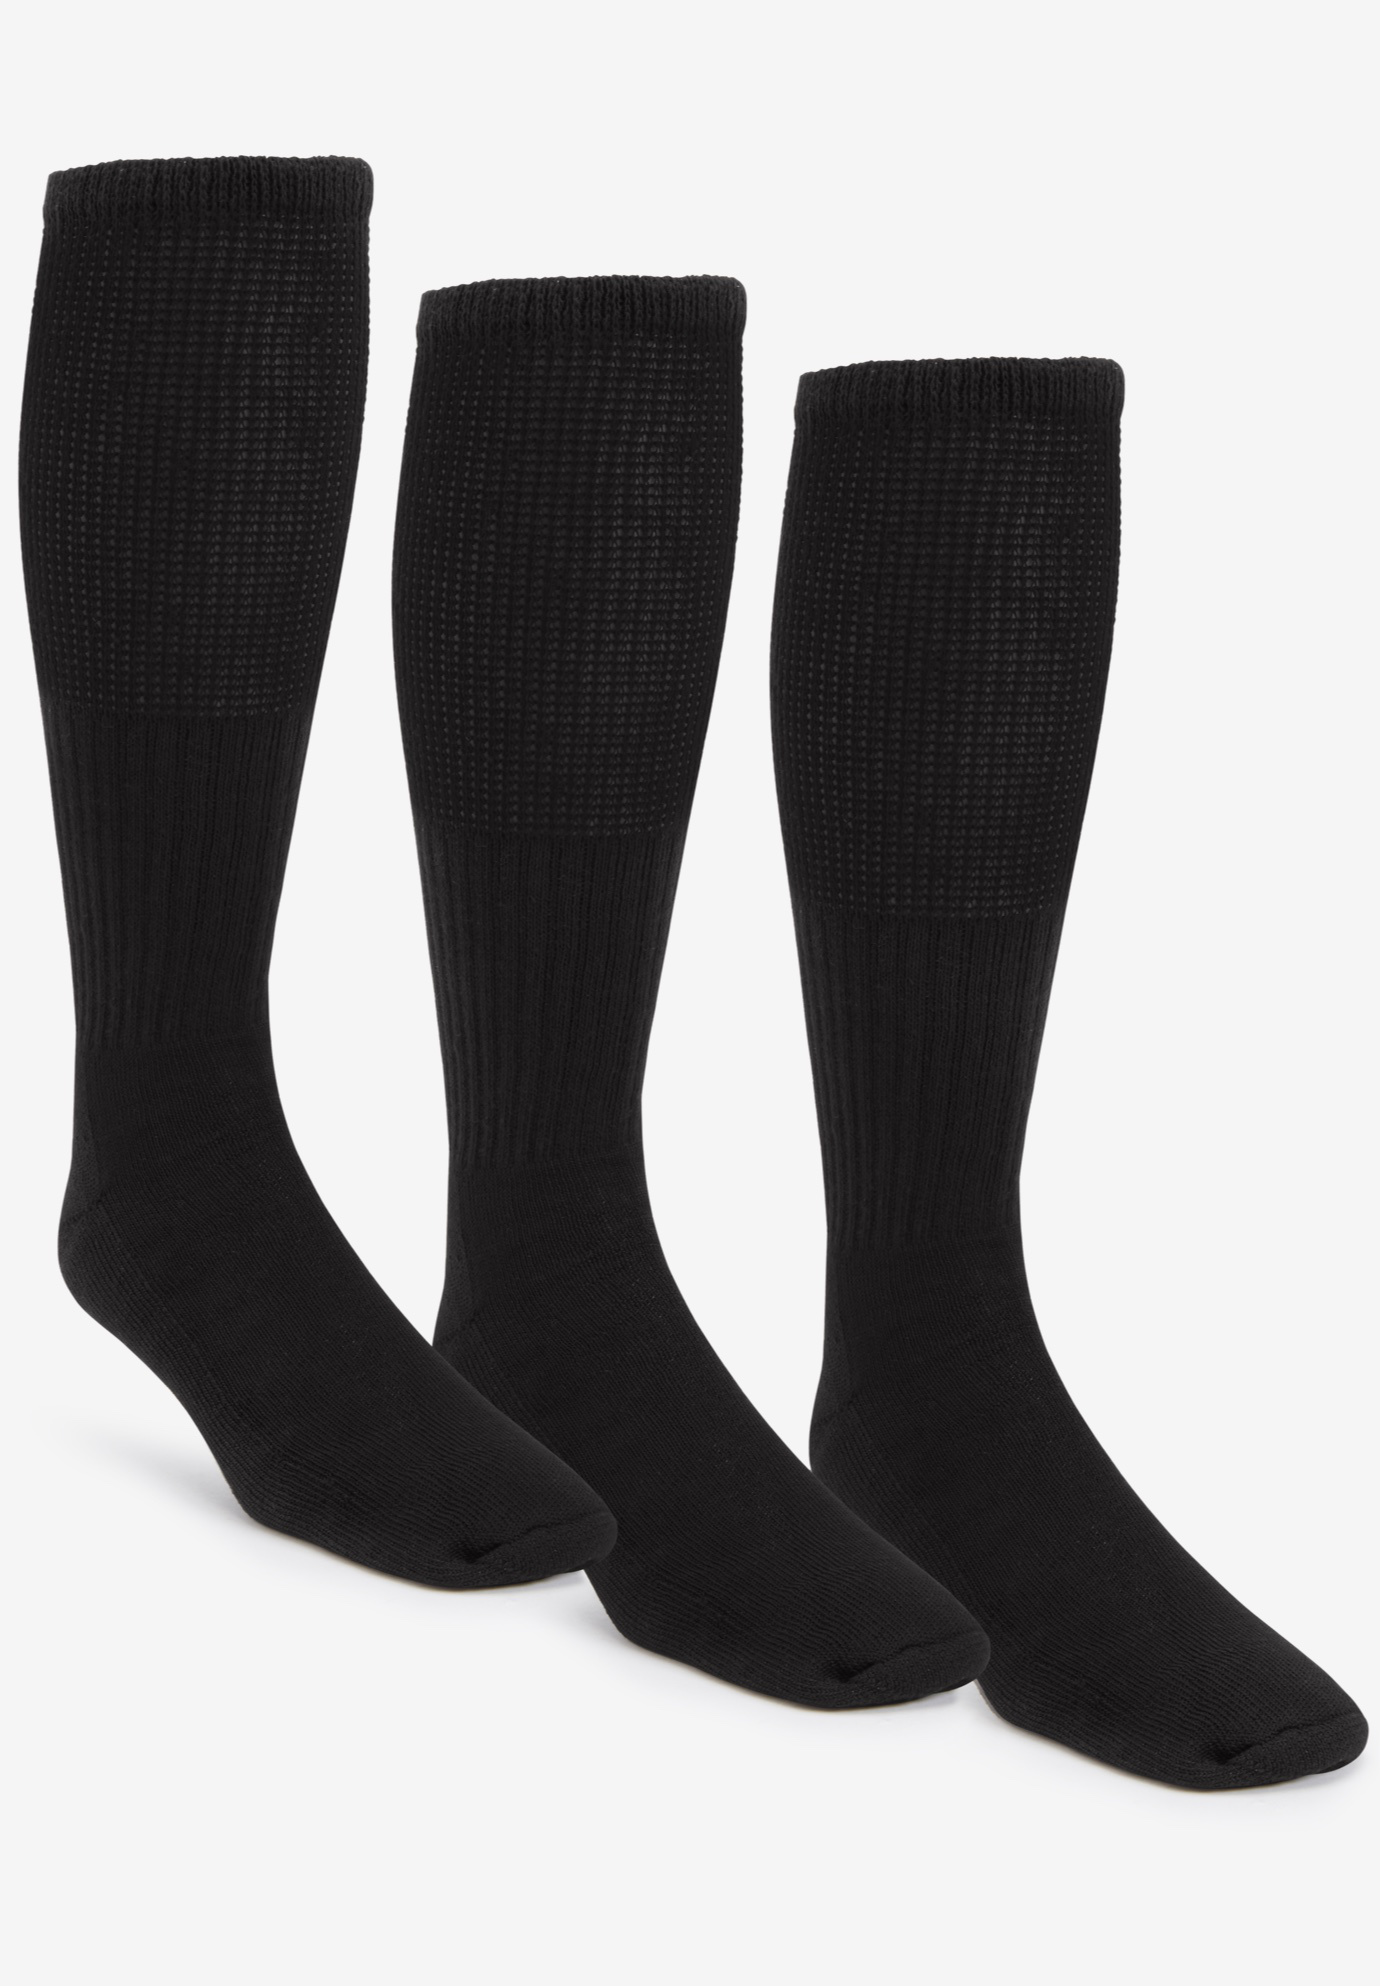 Diabetic Over-the-Calf Extra Wide Socks 3-Pack | King Size